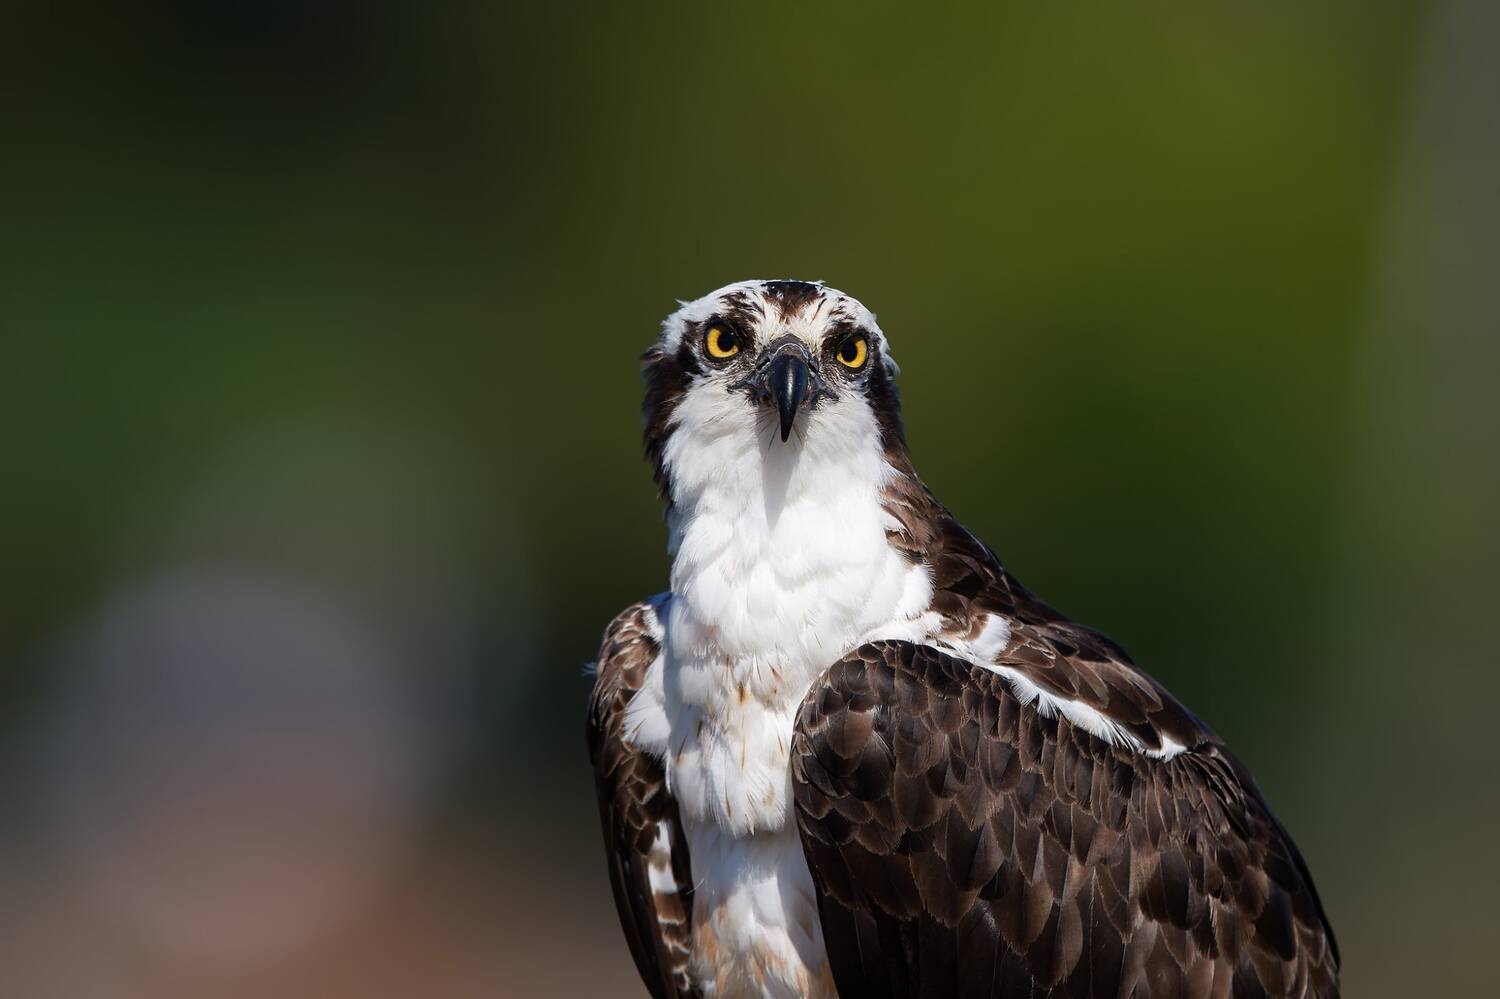 An osprey looking straight at the camera